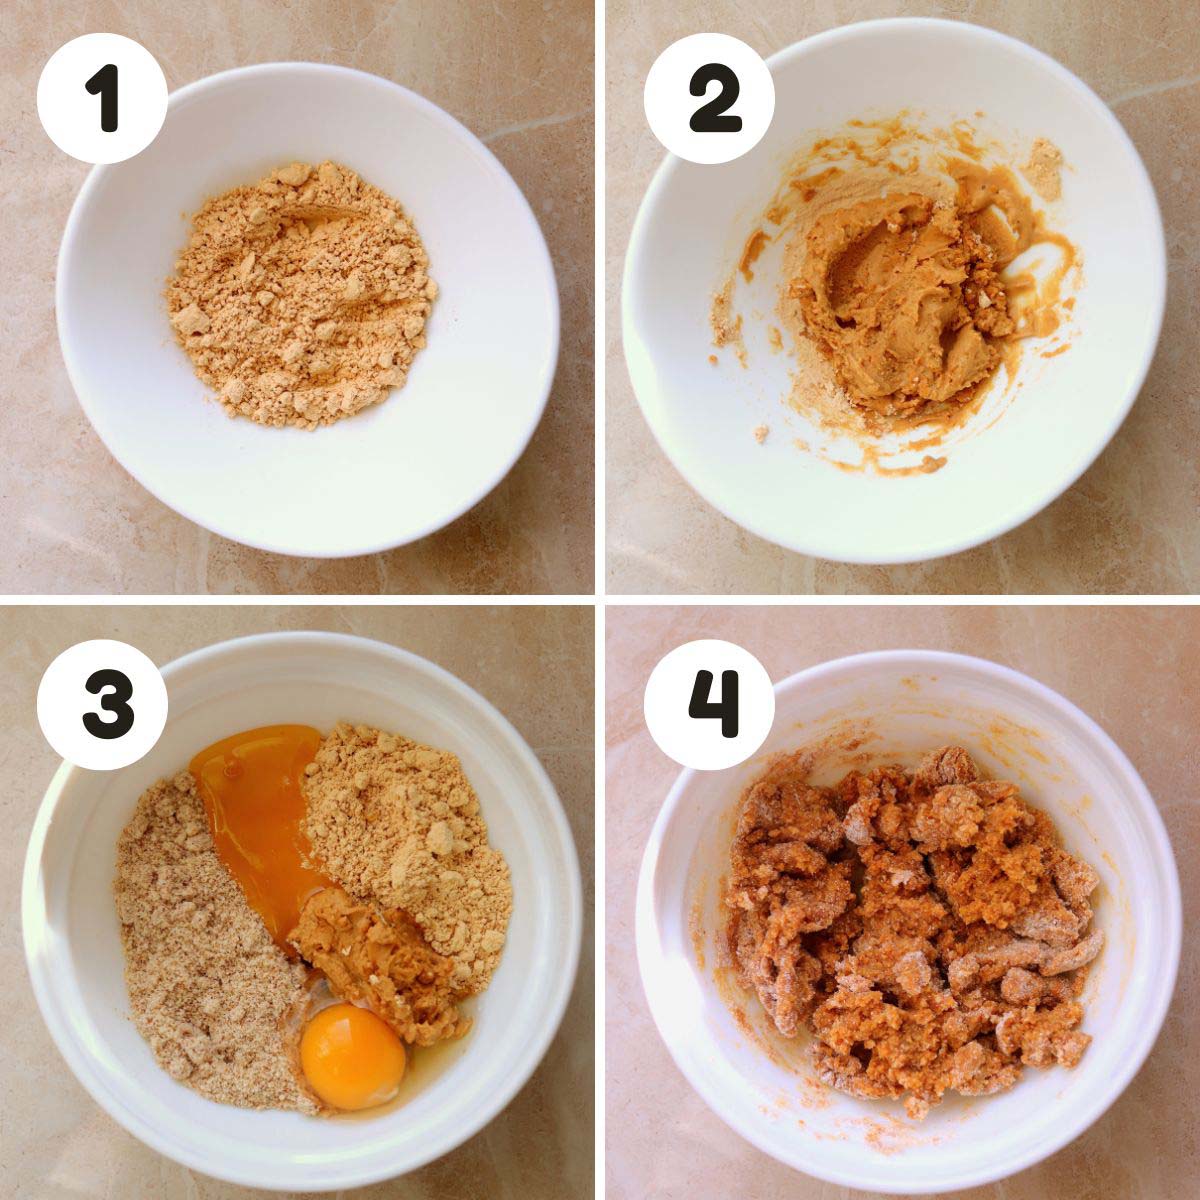 Steps to make the peanut butter cookies.